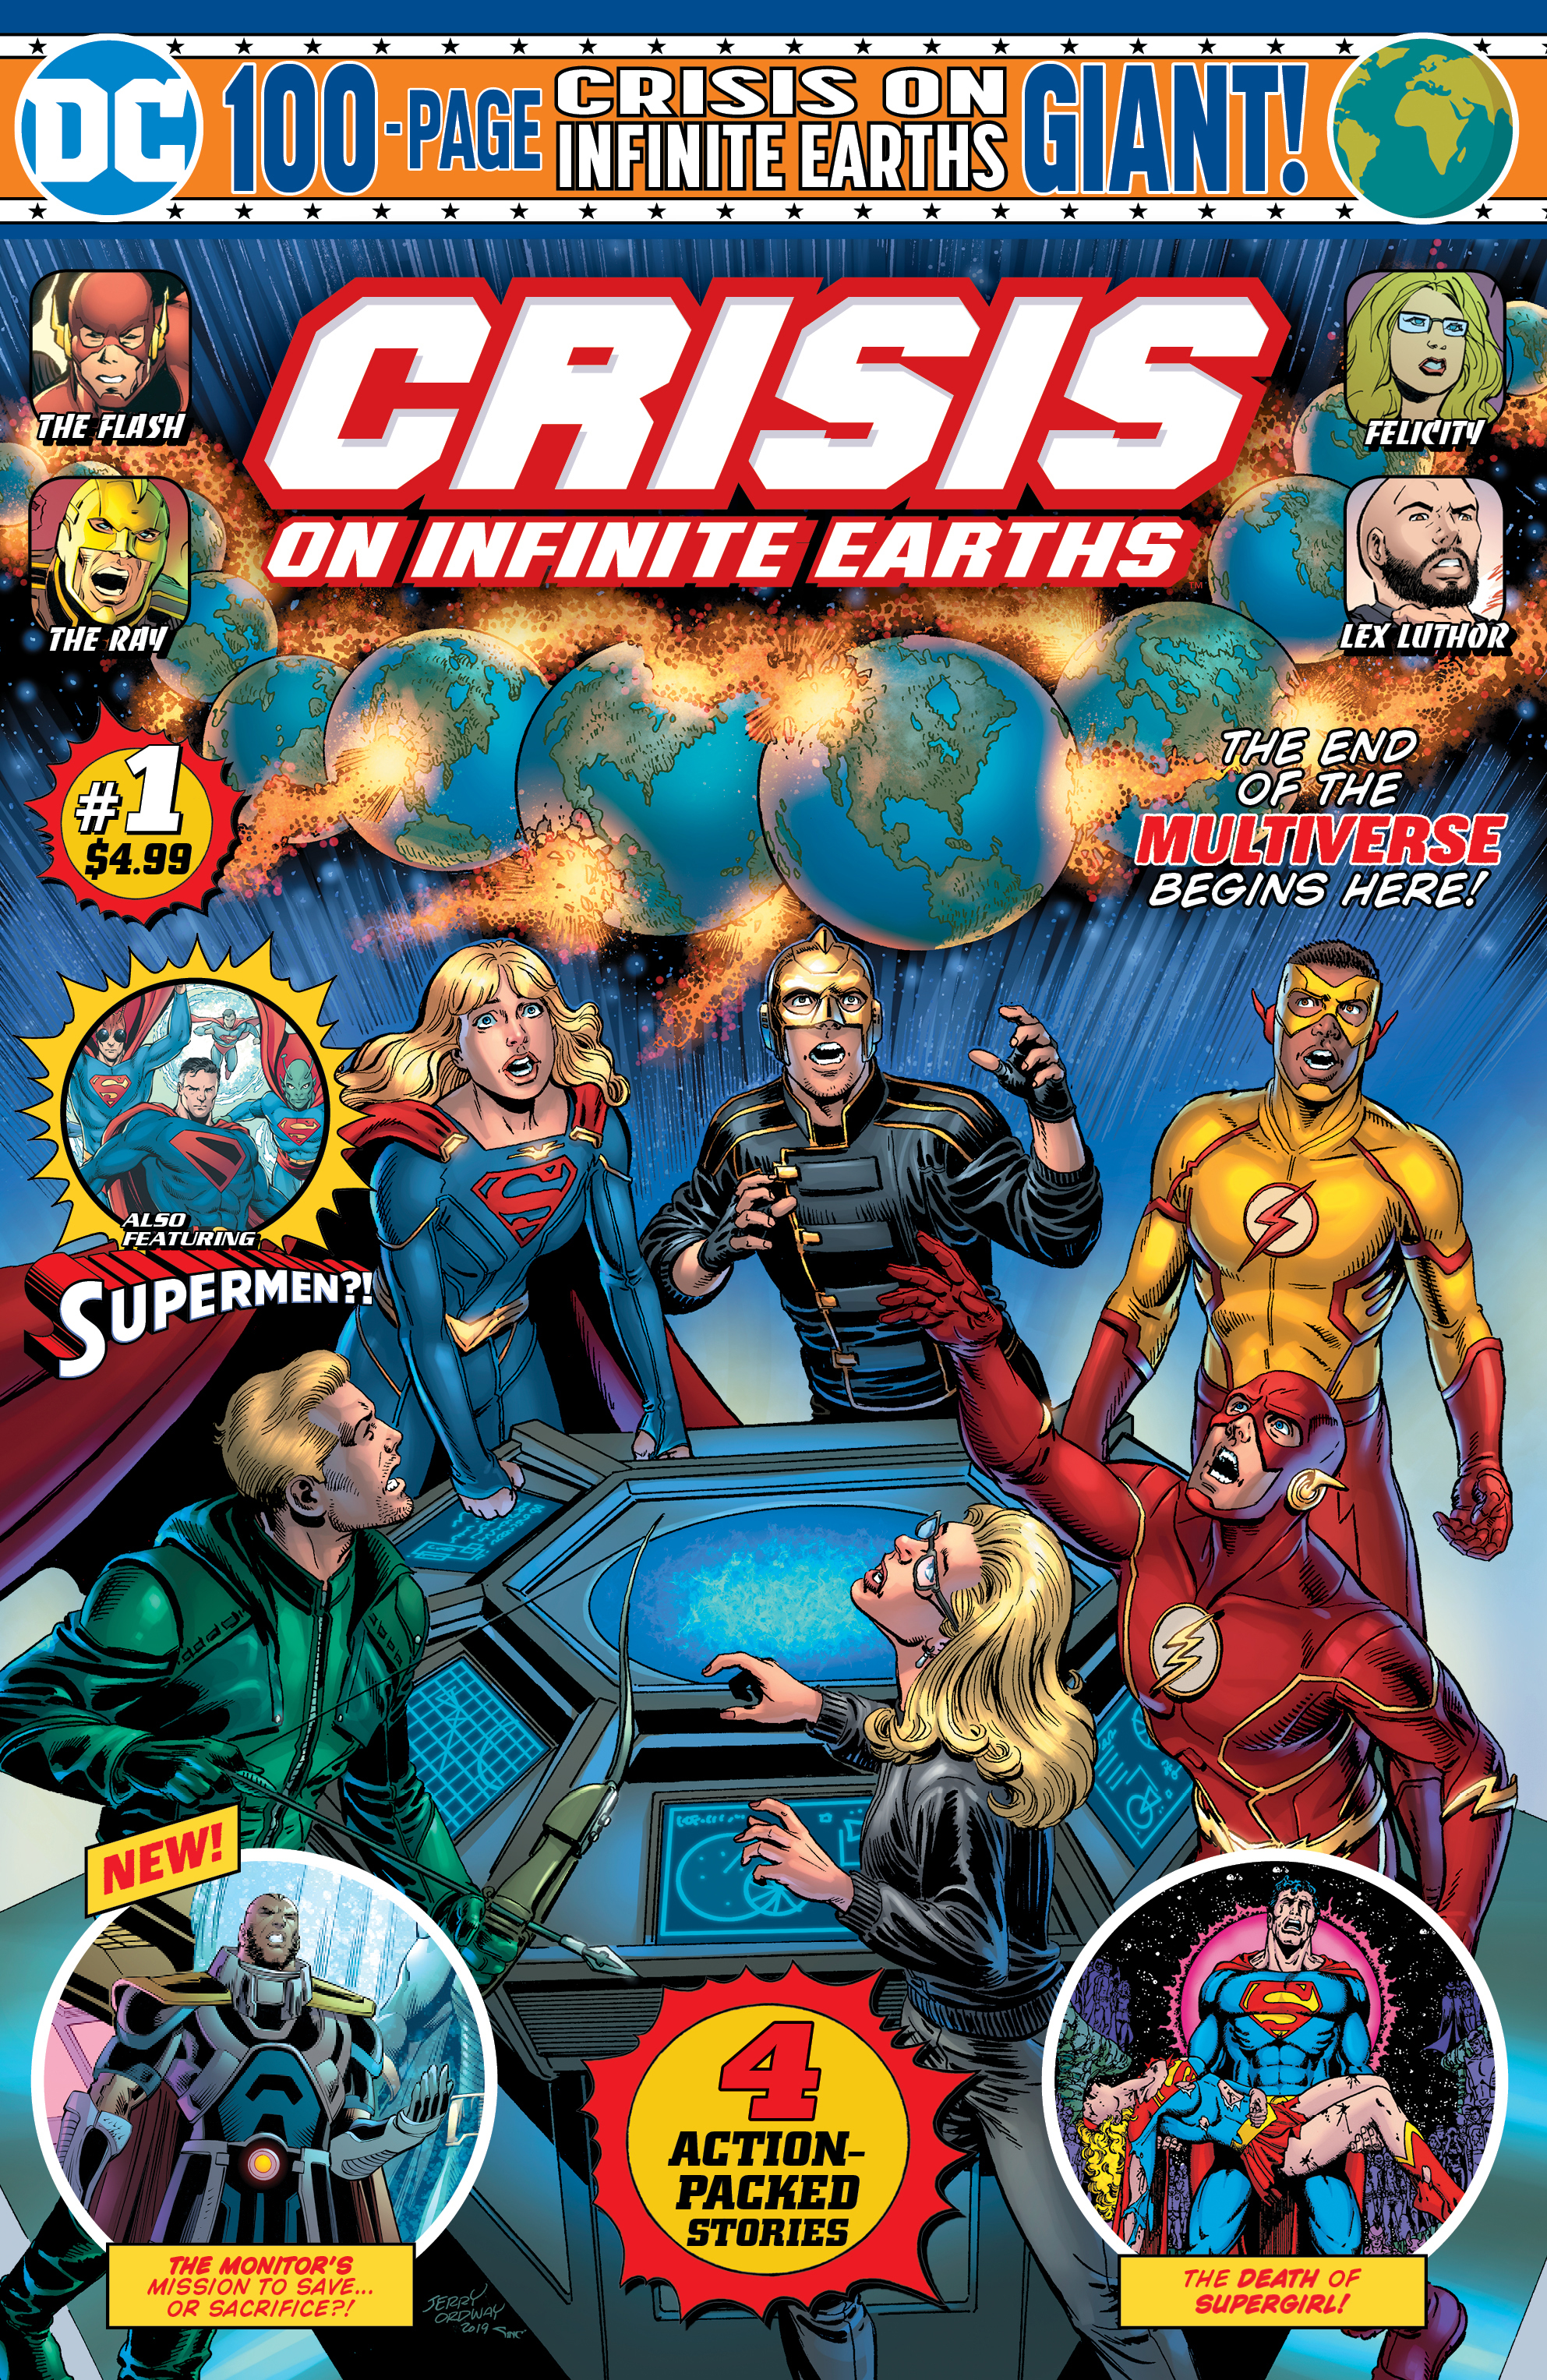 https://static.wikia.nocookie.net/arrow/images/e/e8/Crisis_on_Infinite_Earths_Giant_1_cover.png/revision/latest?cb=20191220193747